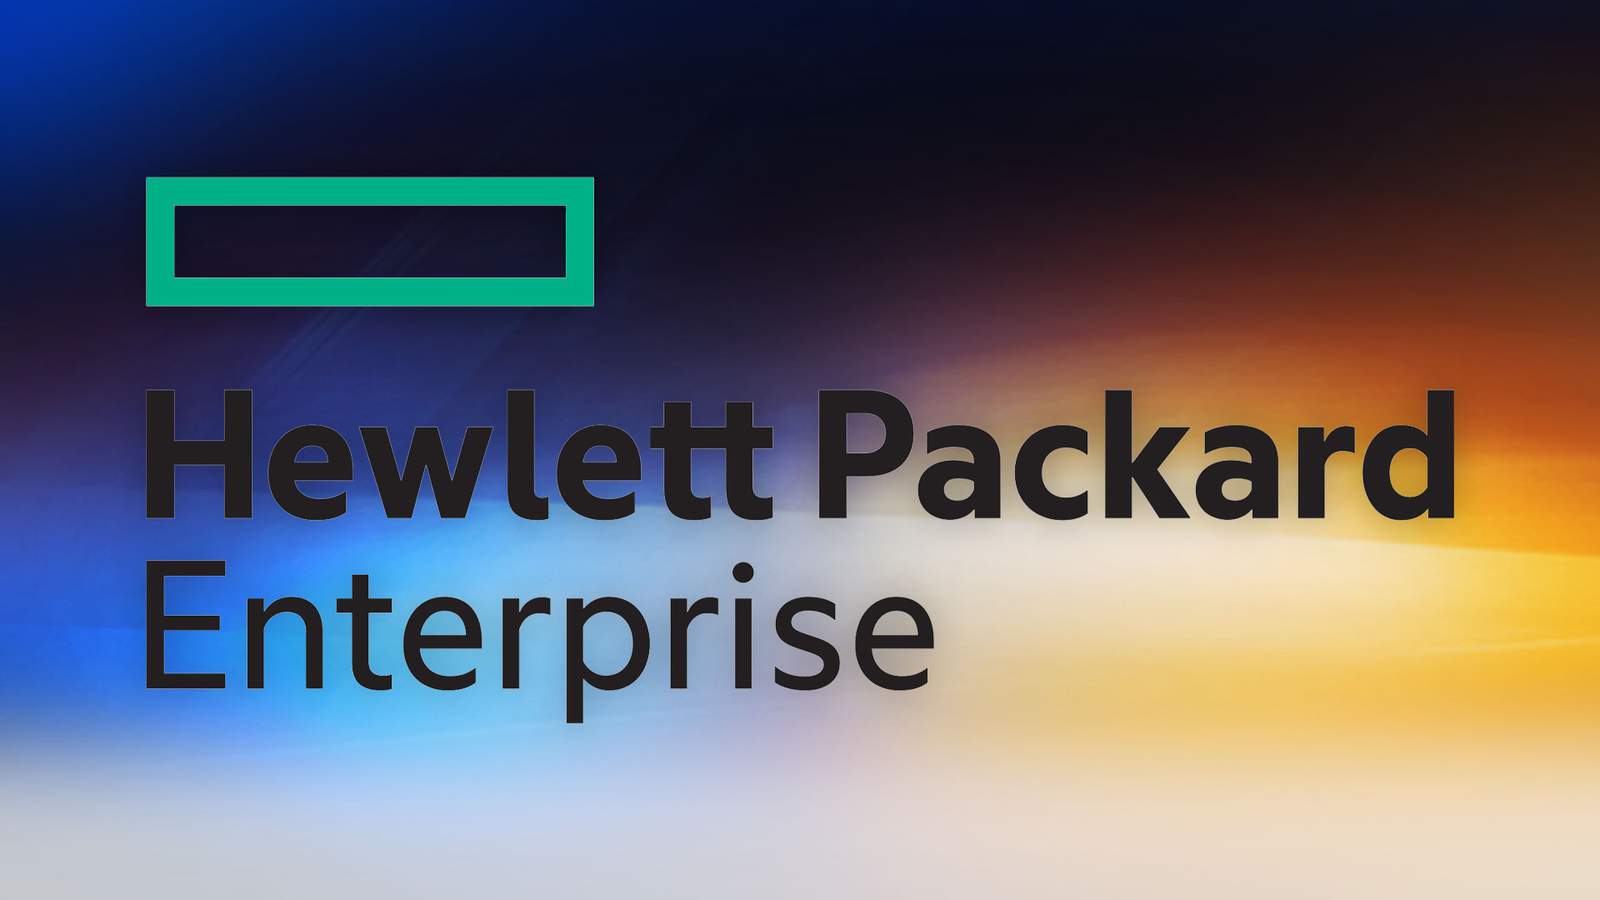 Hewlett Packard Enterprise moving its headquarters from California to Houston area